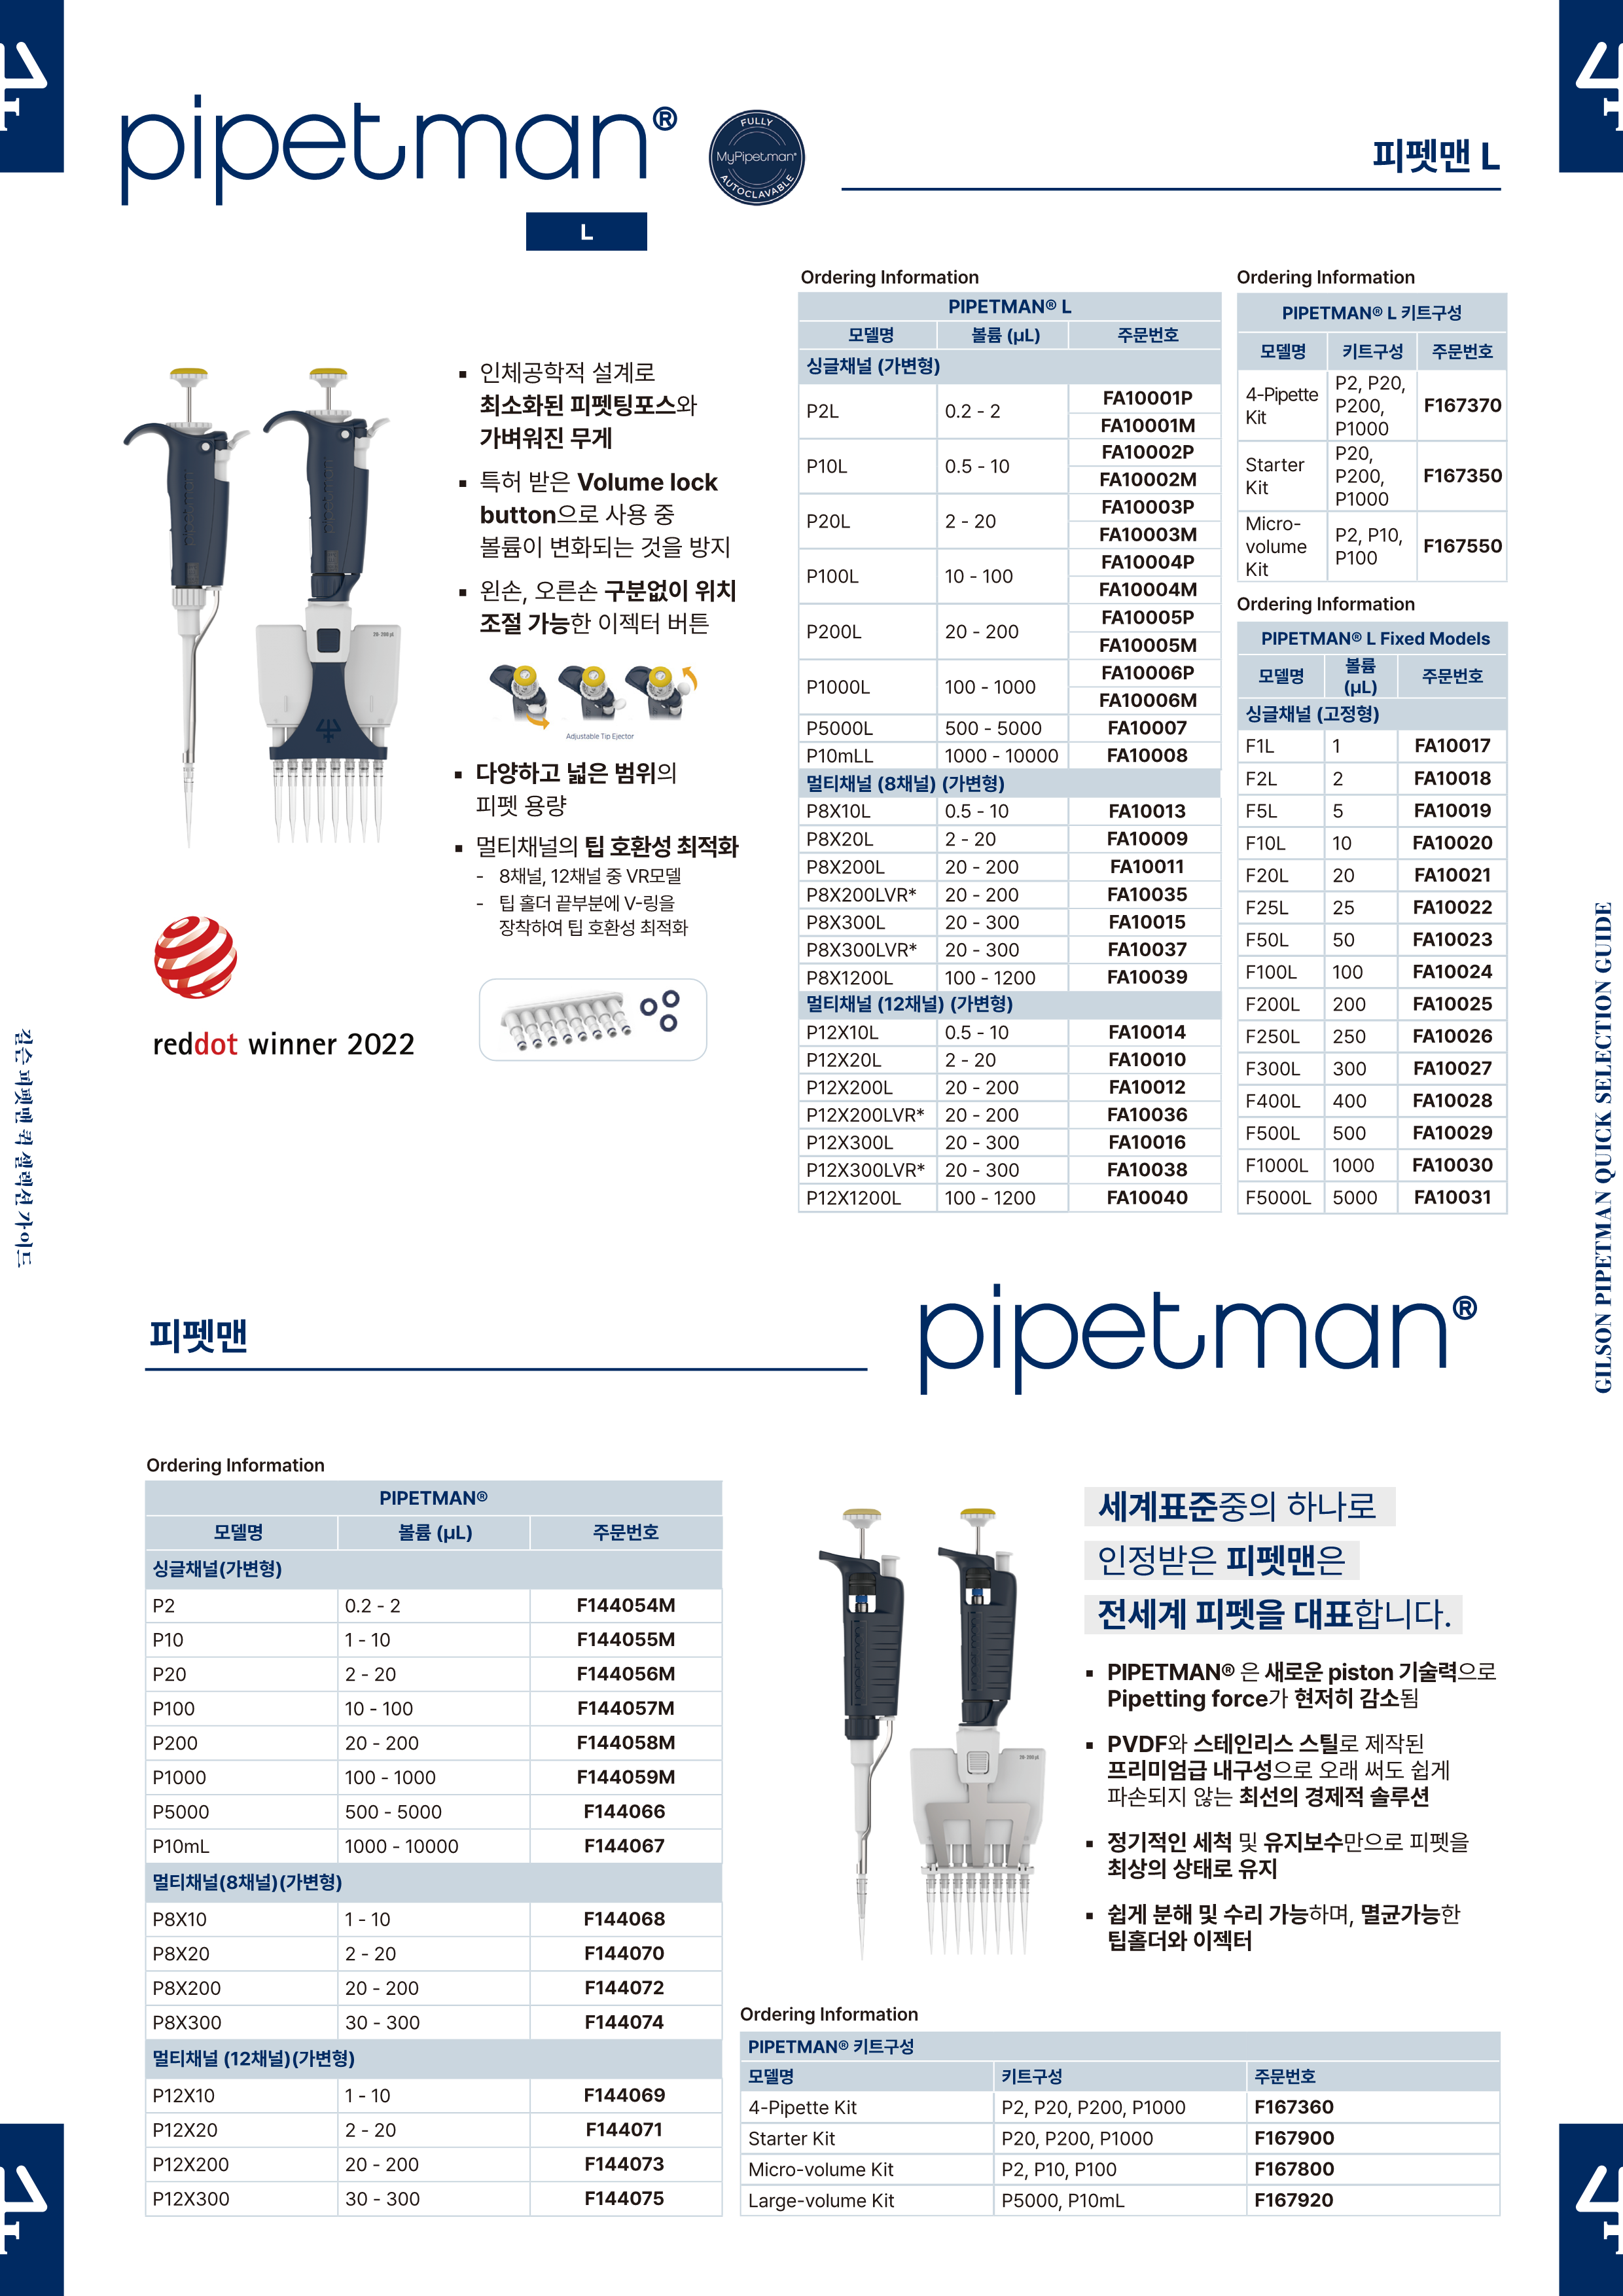 Gilson Pipetman Quick Selection Guide_3.png